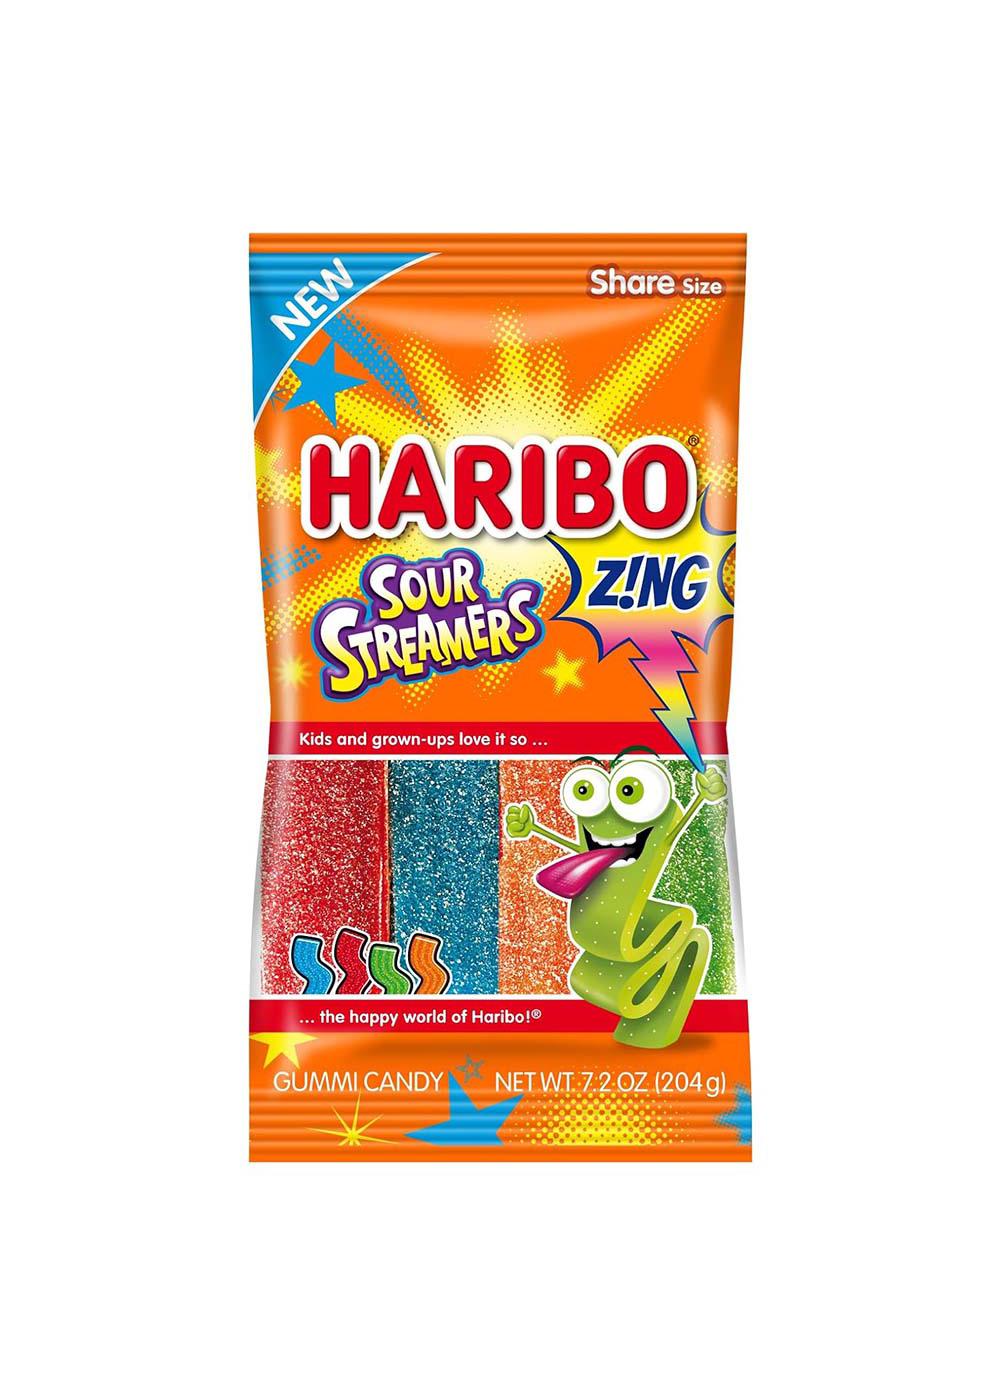 Haribo Sour Streamers Gummi Candy - Share Size; image 1 of 2